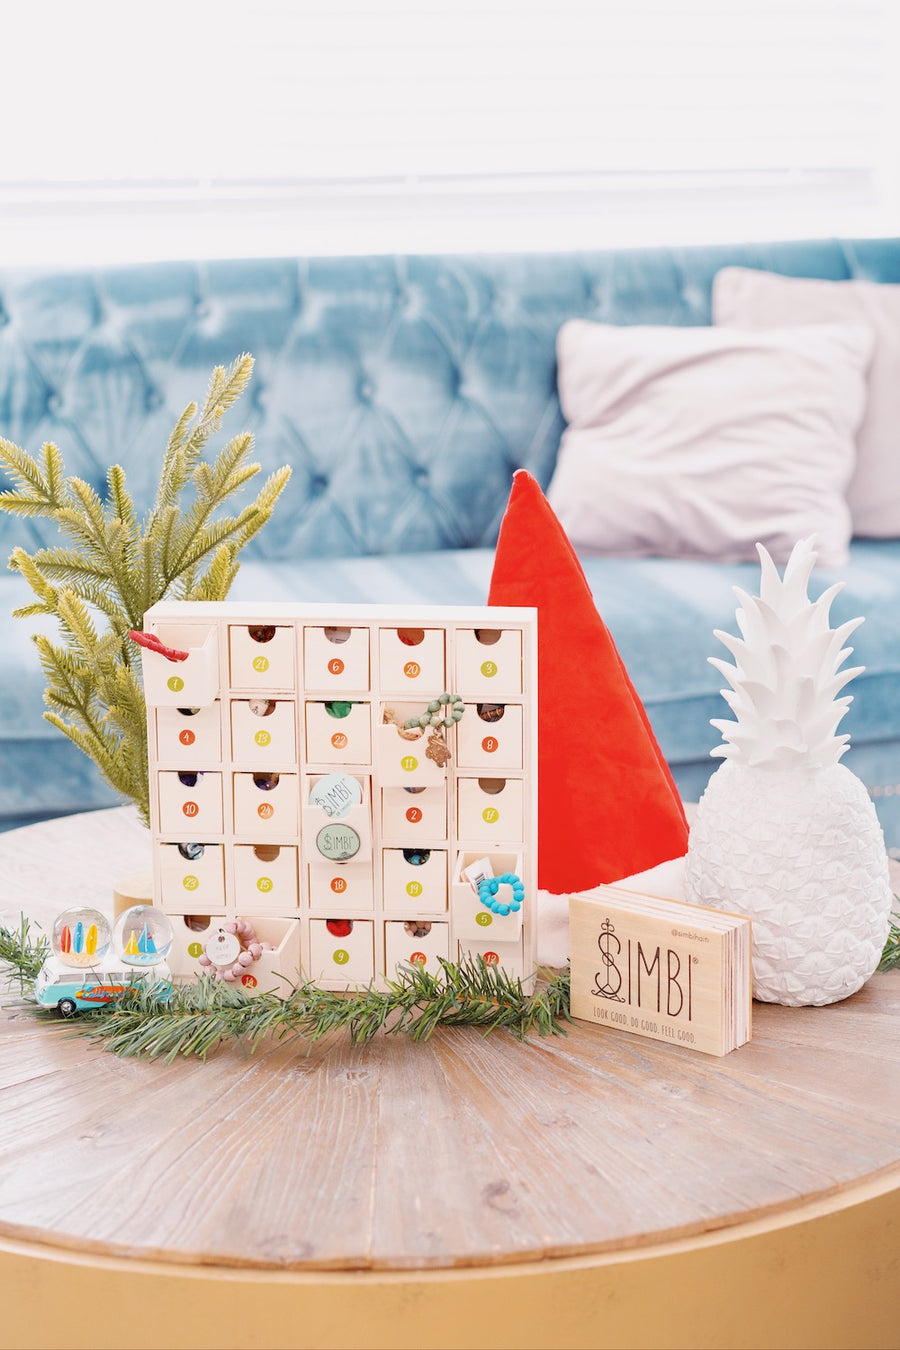 advent calendar filled with surprise jewelry and hair-wear